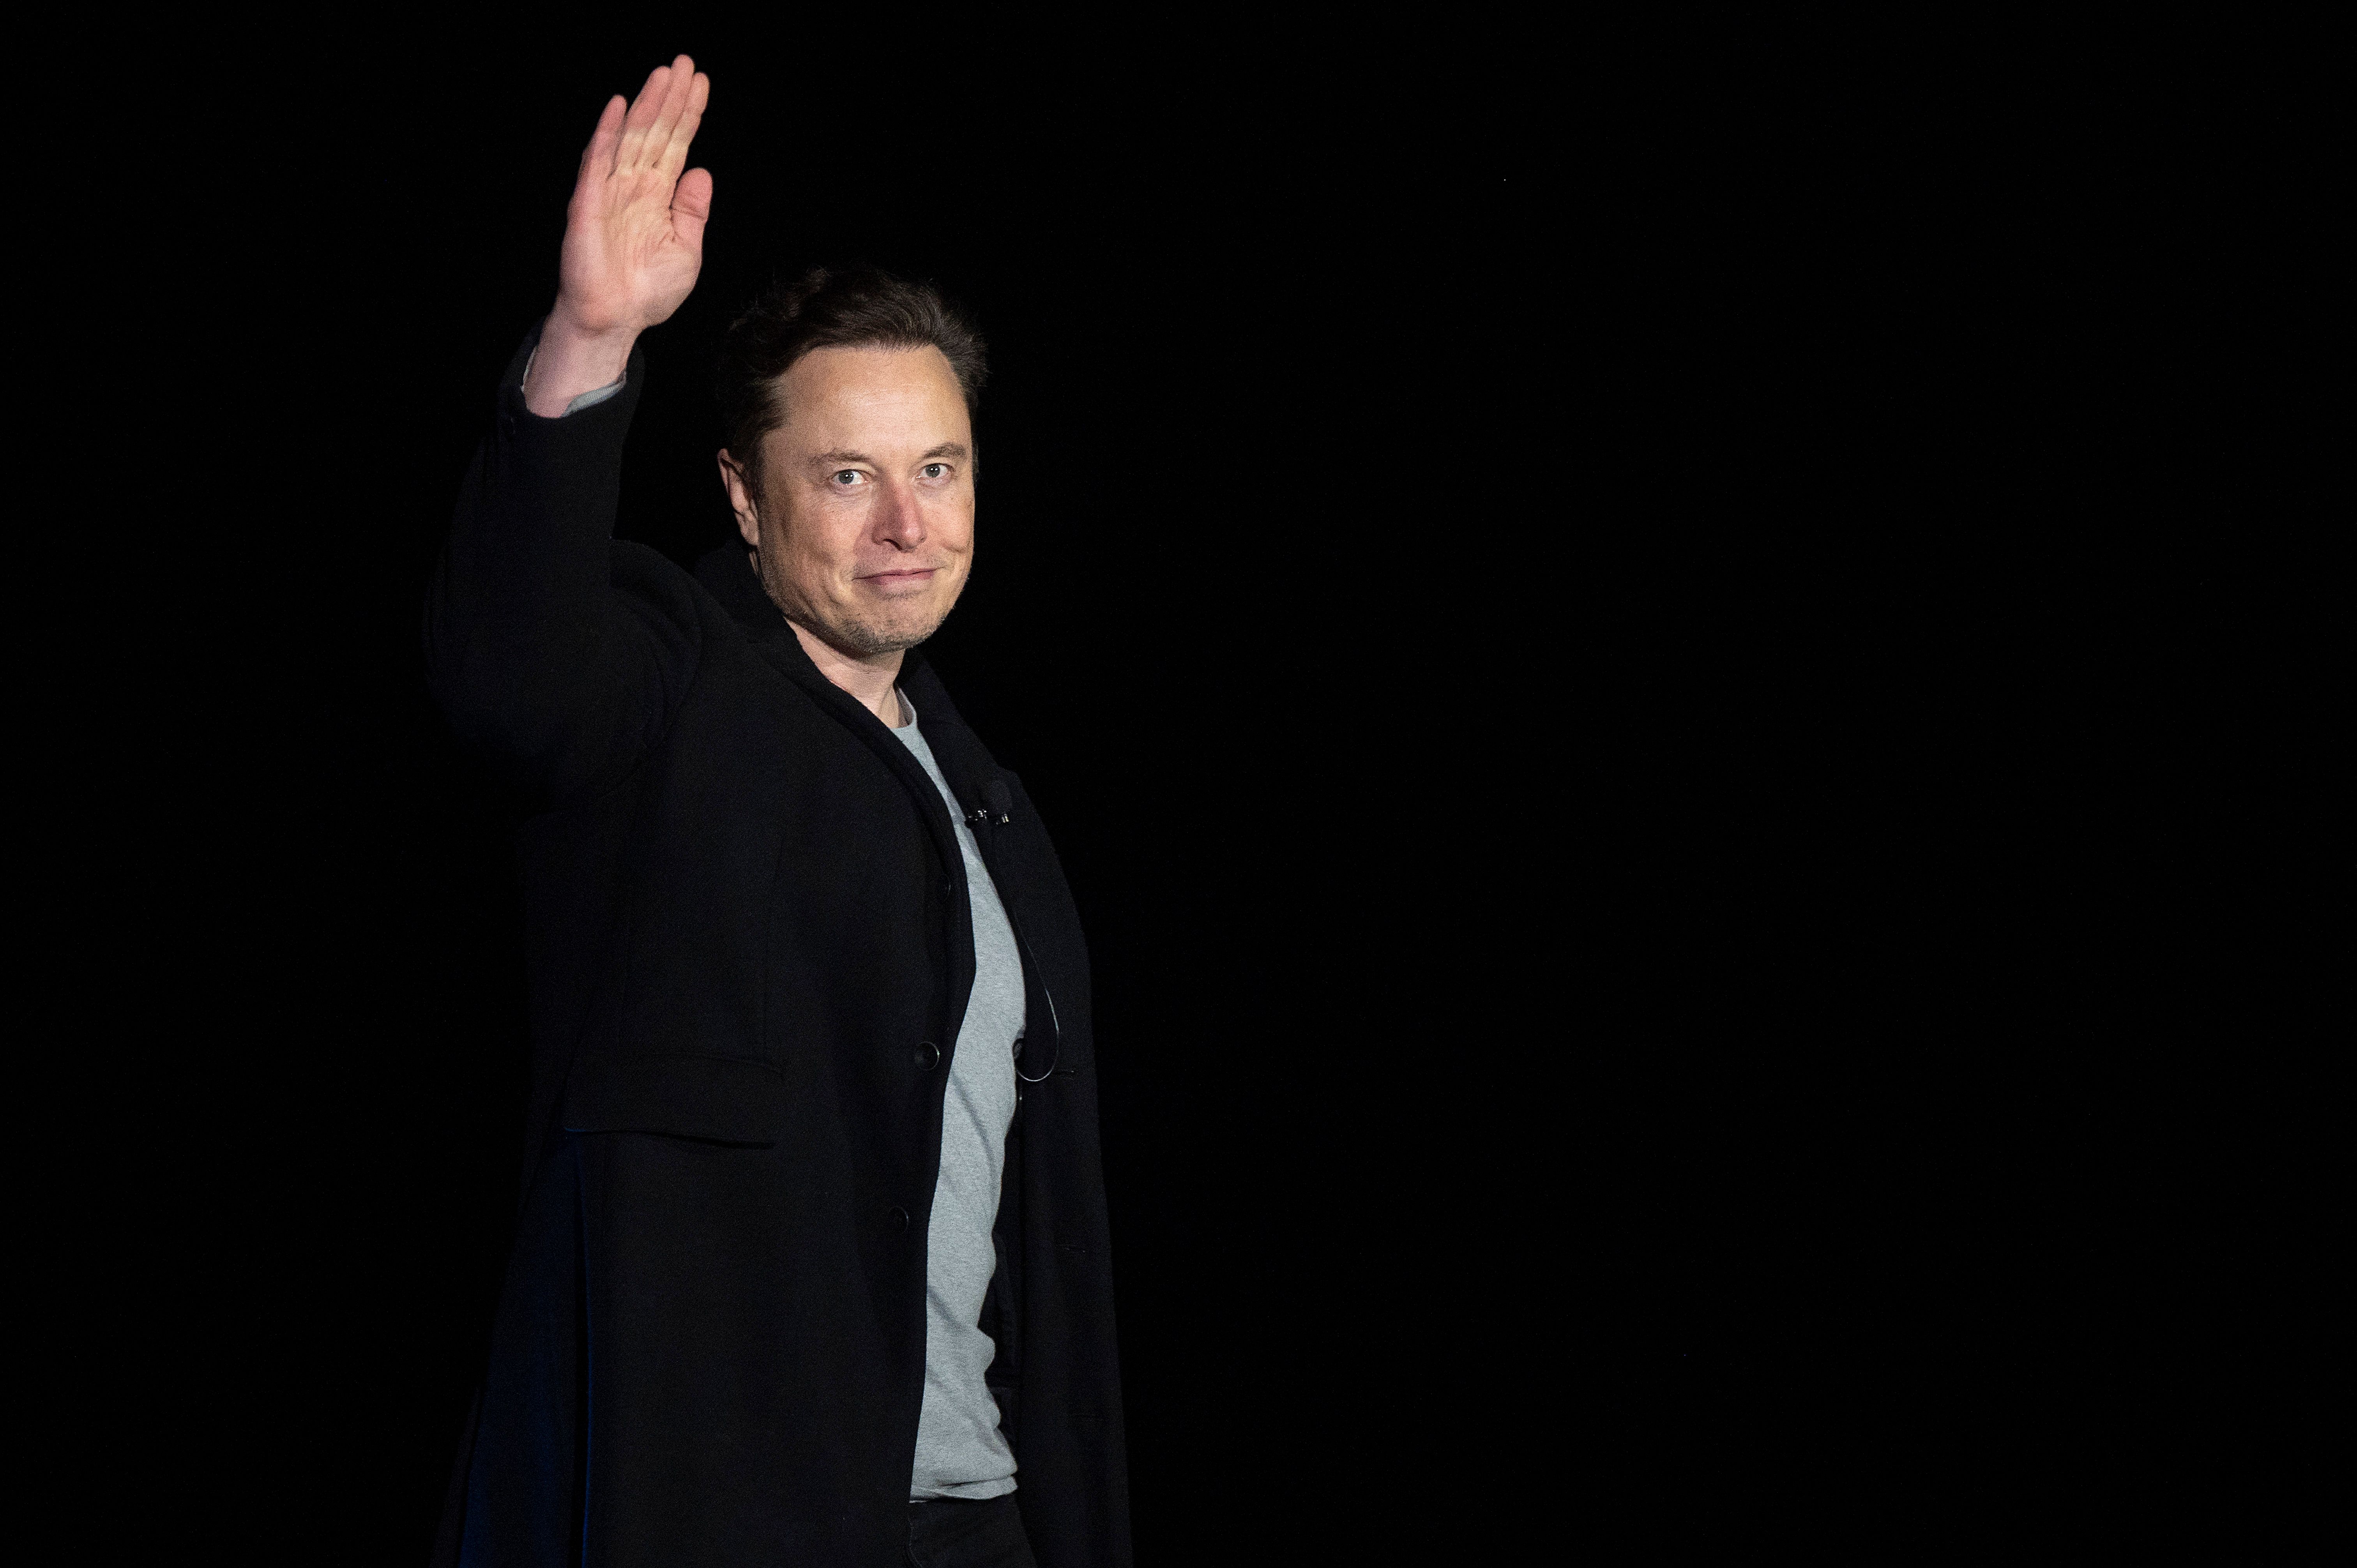 Musk’s venting at Vancouver TED event angers investors suing over 2018 tweets